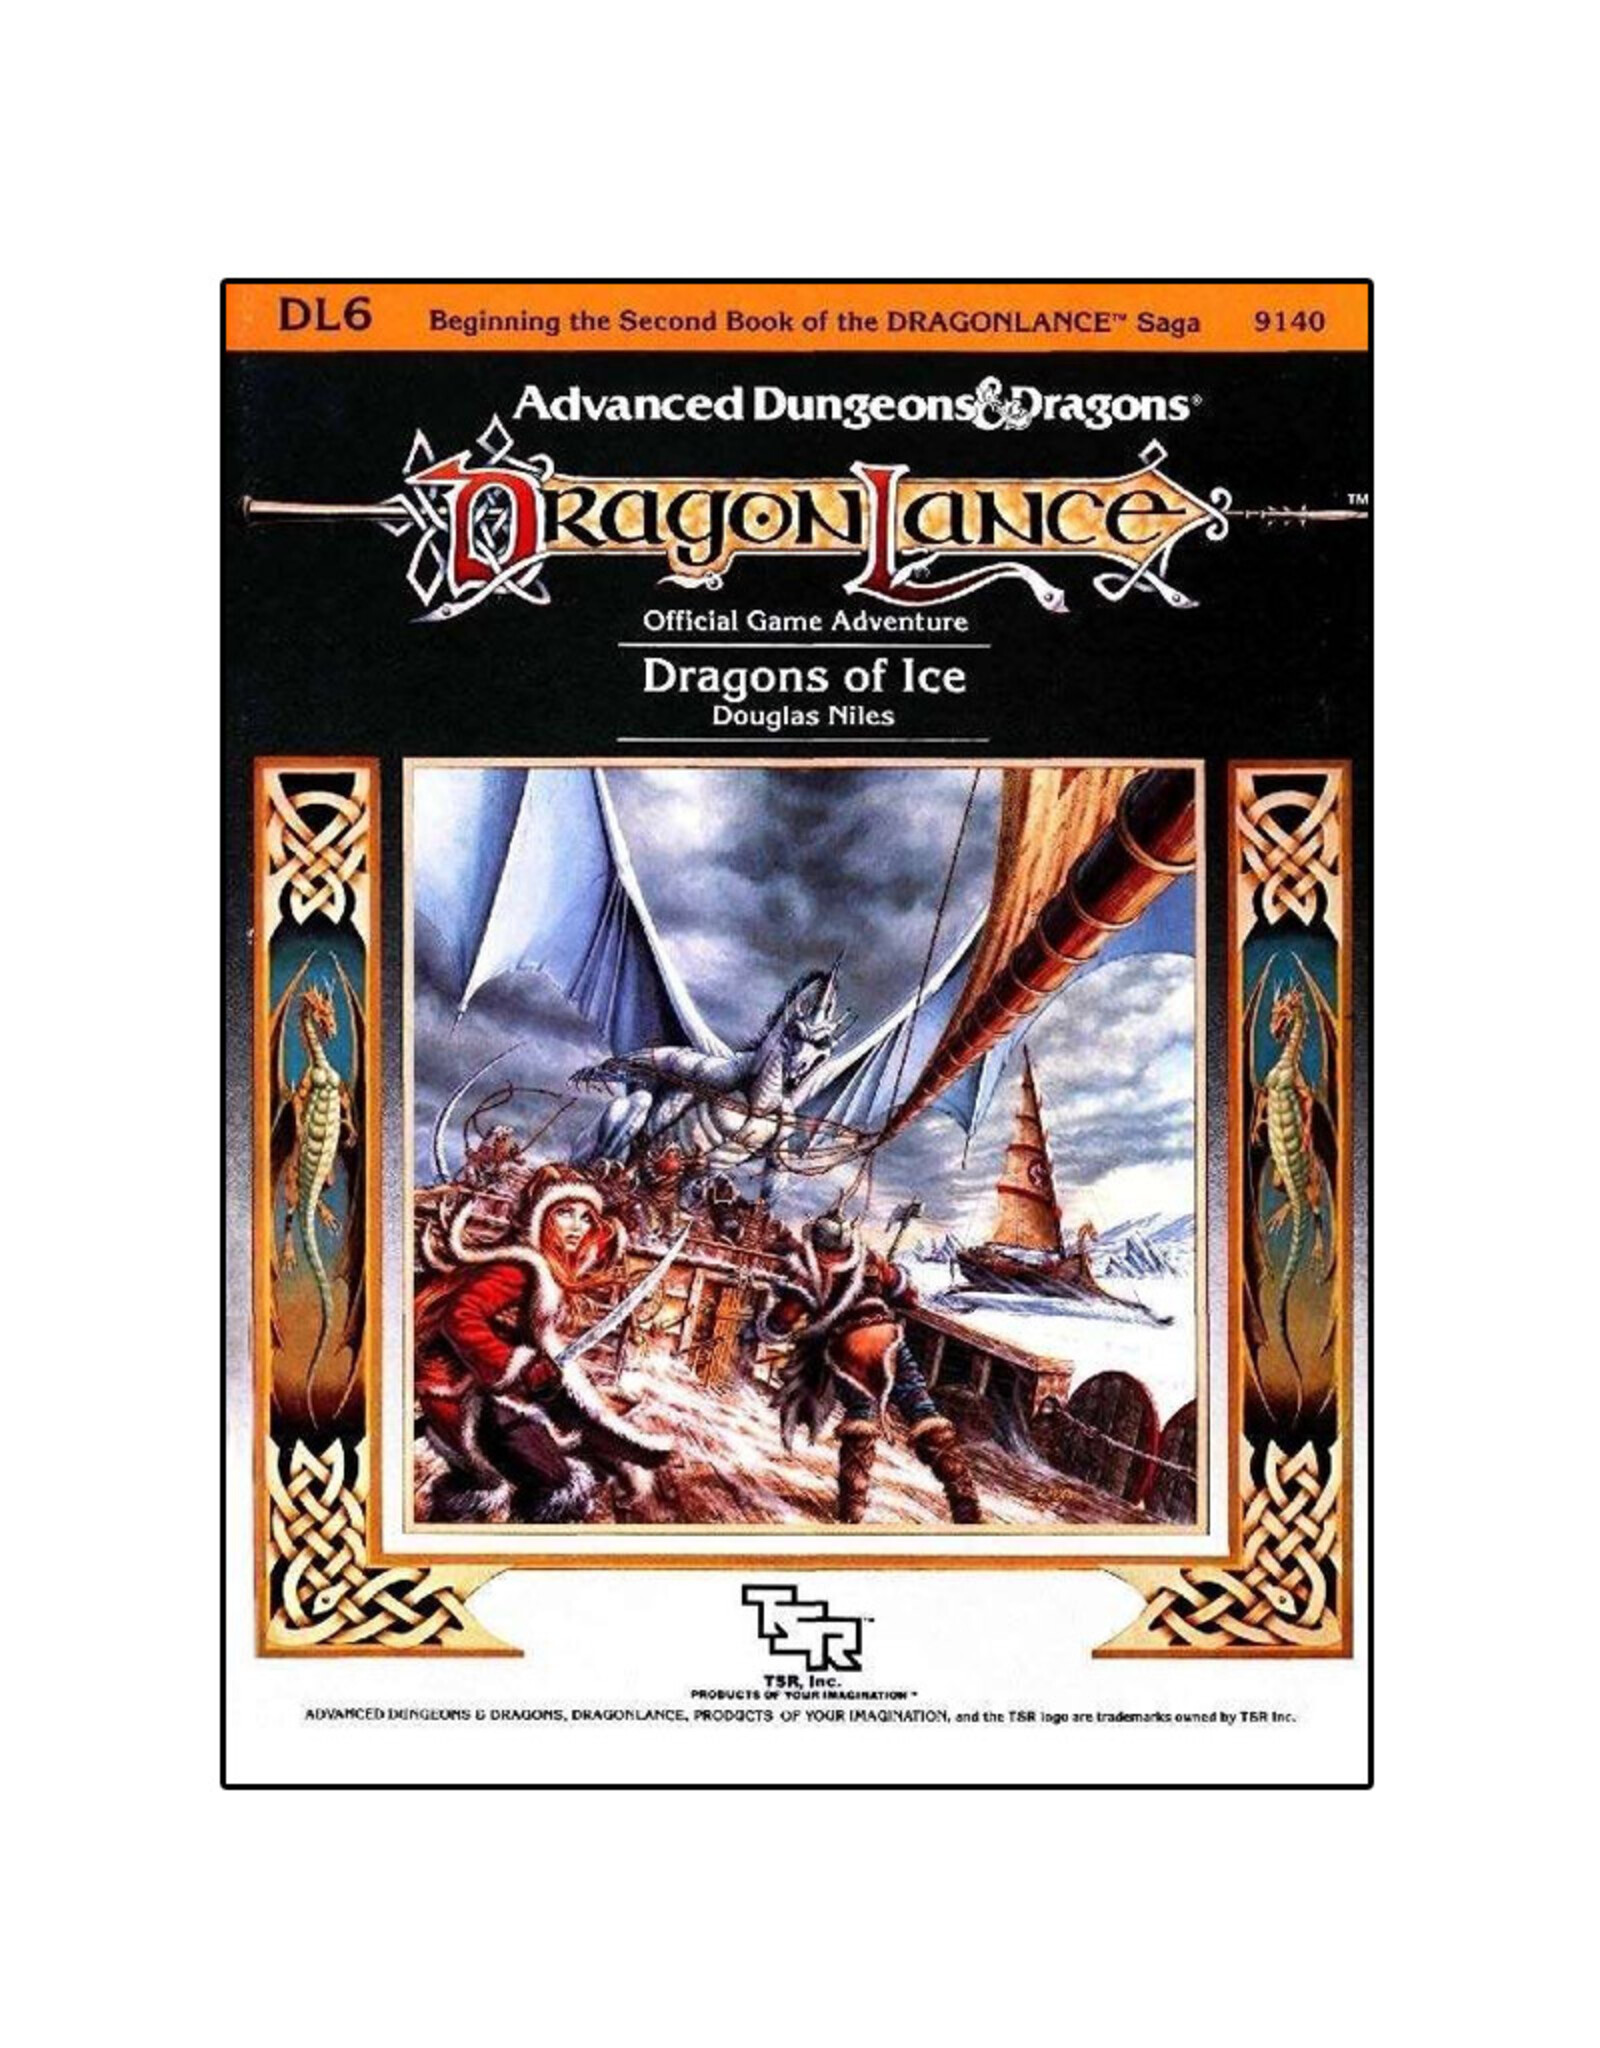 TSR USED - Advanced Dungeons & Dragons Dragon Lance: Dragons of Ice DL6